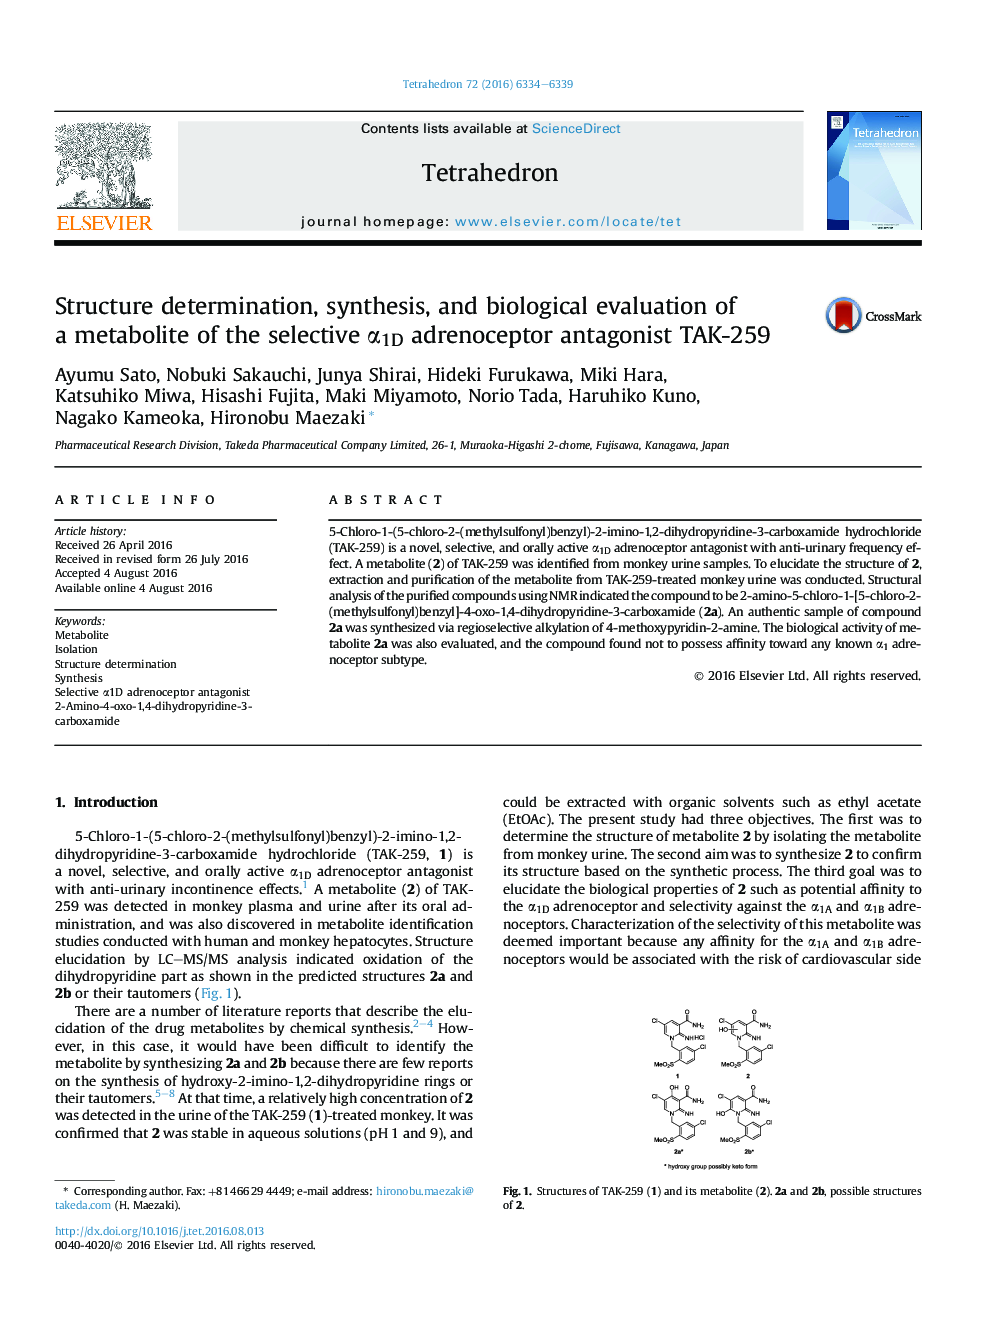 Structure determination, synthesis, and biological evaluation of a metabolite of the selective Î±1D adrenoceptor antagonist TAK-259